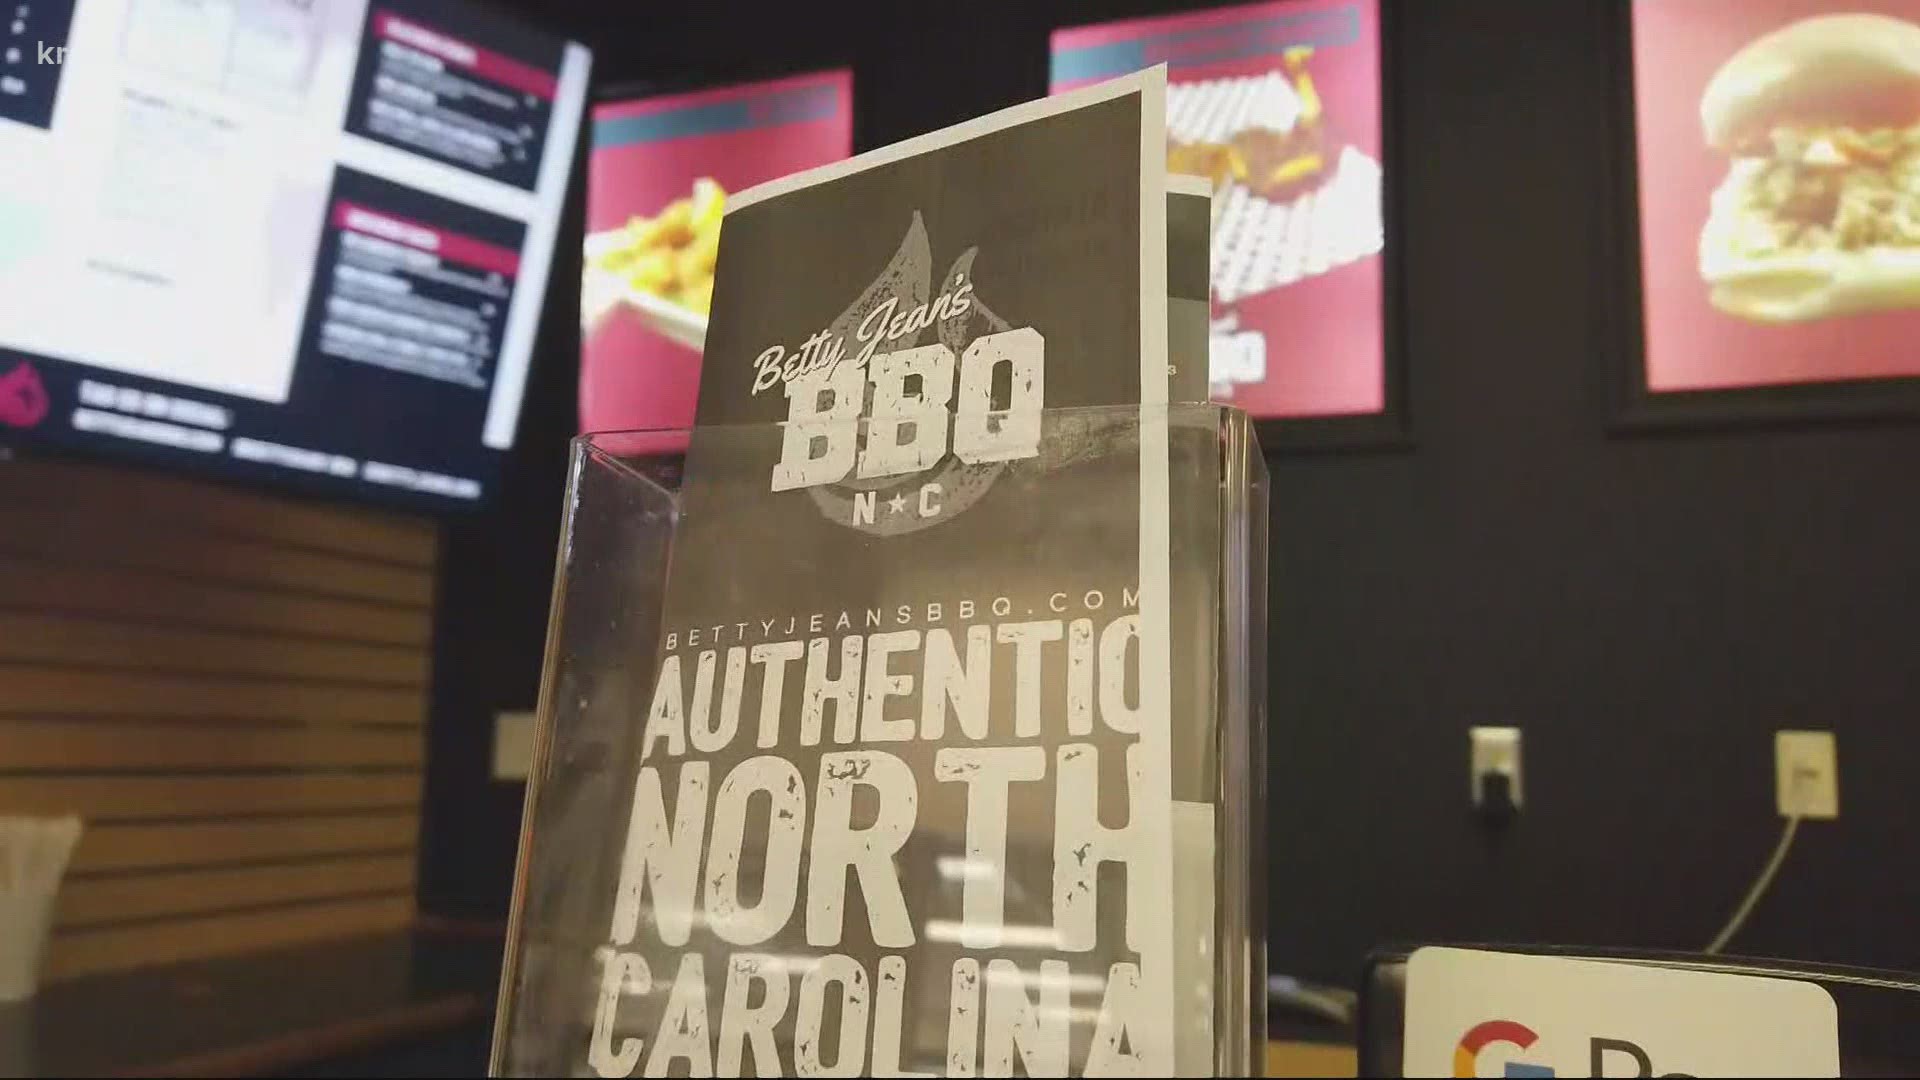 Betty Jean’s BBQ has been dishing out North Carolina cuisine at the military base for the last five years.